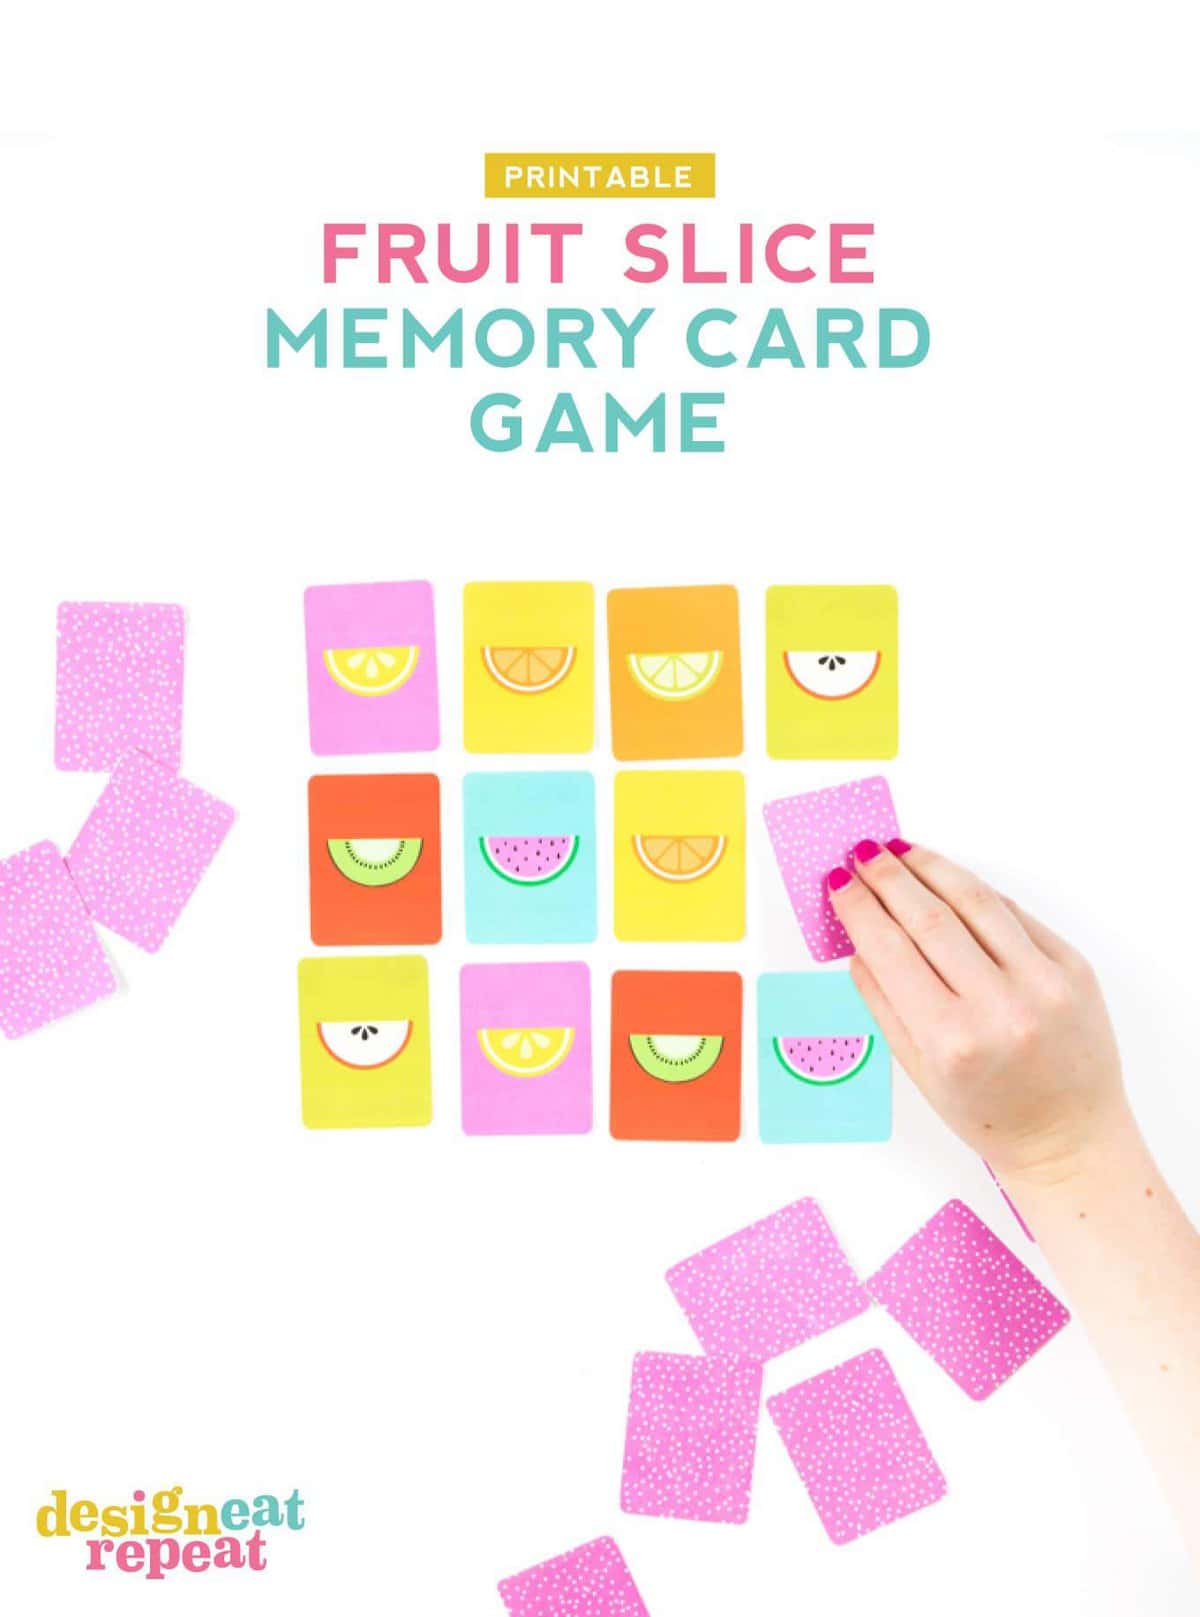 This adorable FREE fruit inspired memory game is a perfect way to keep the kiddos busy during the summer months!